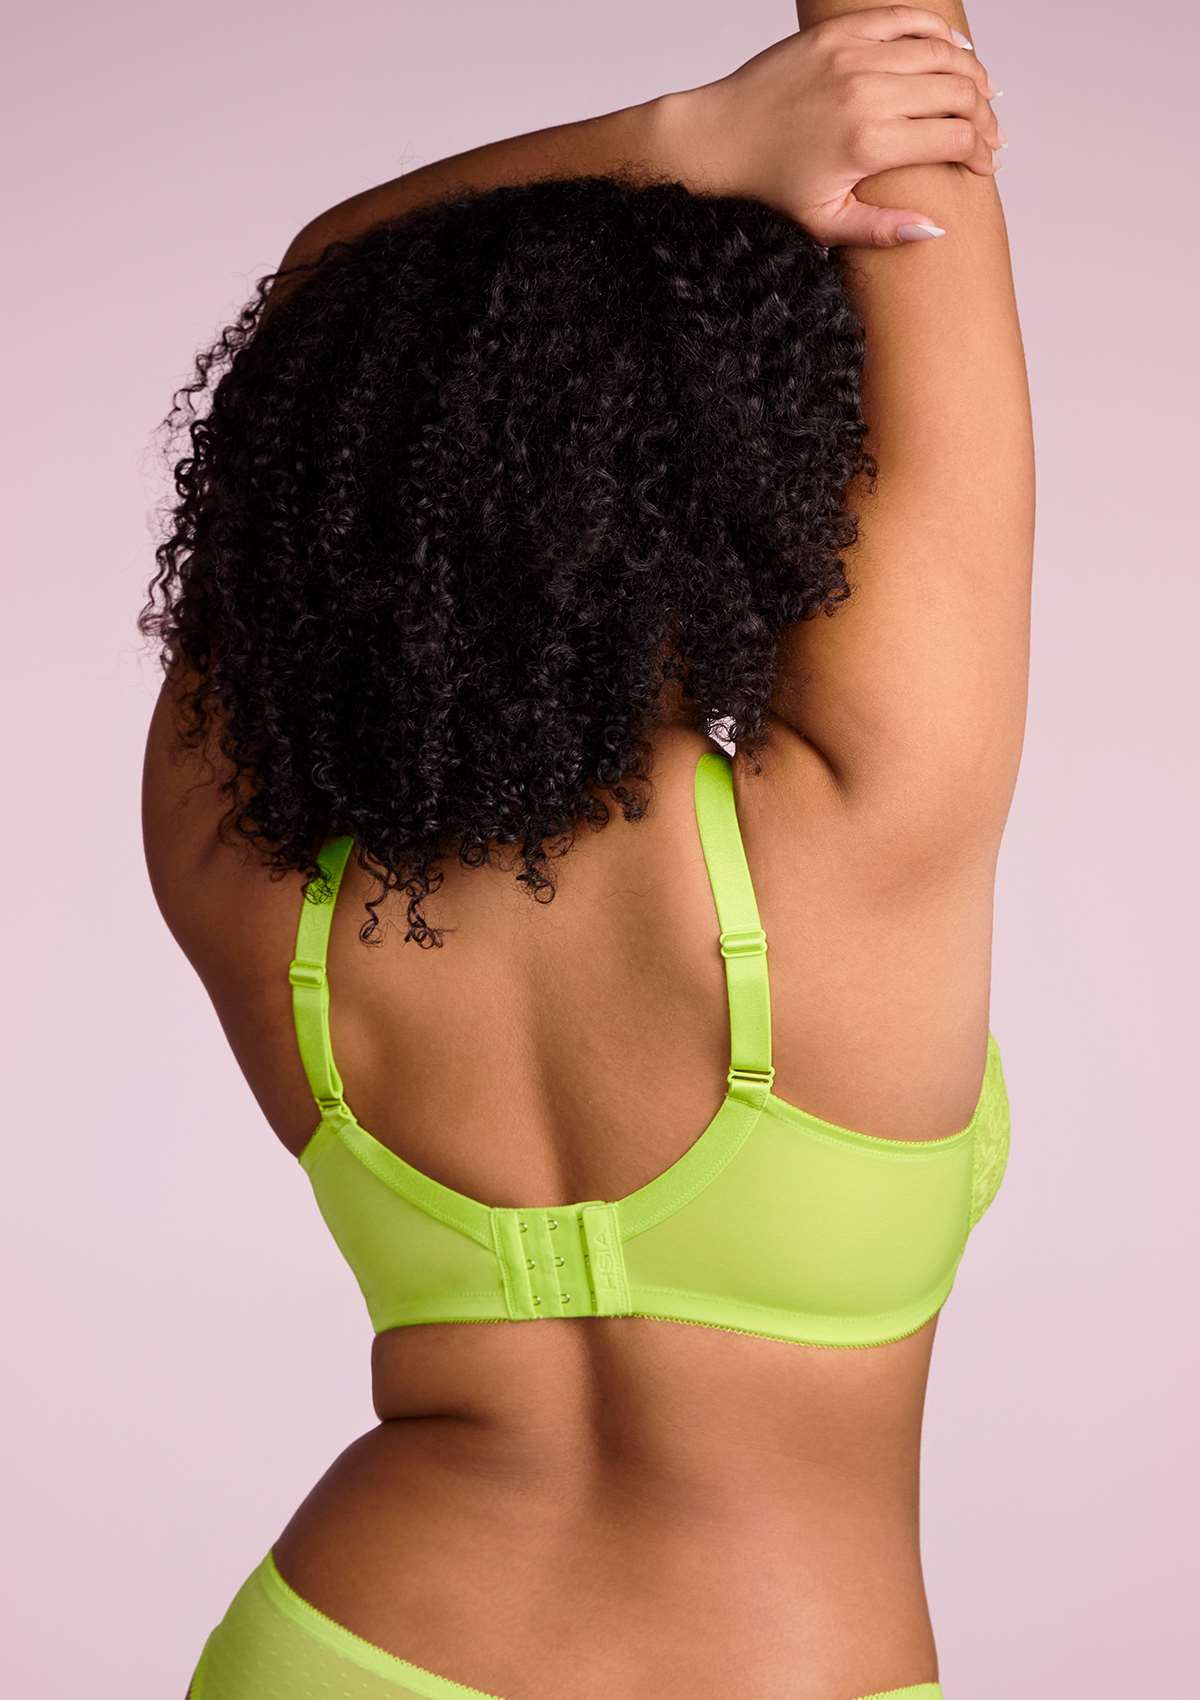 HSIA Enchante Full Cup Minimizing Bra: Supportive Unlined Lace Bra - Lime Green / 38 / H